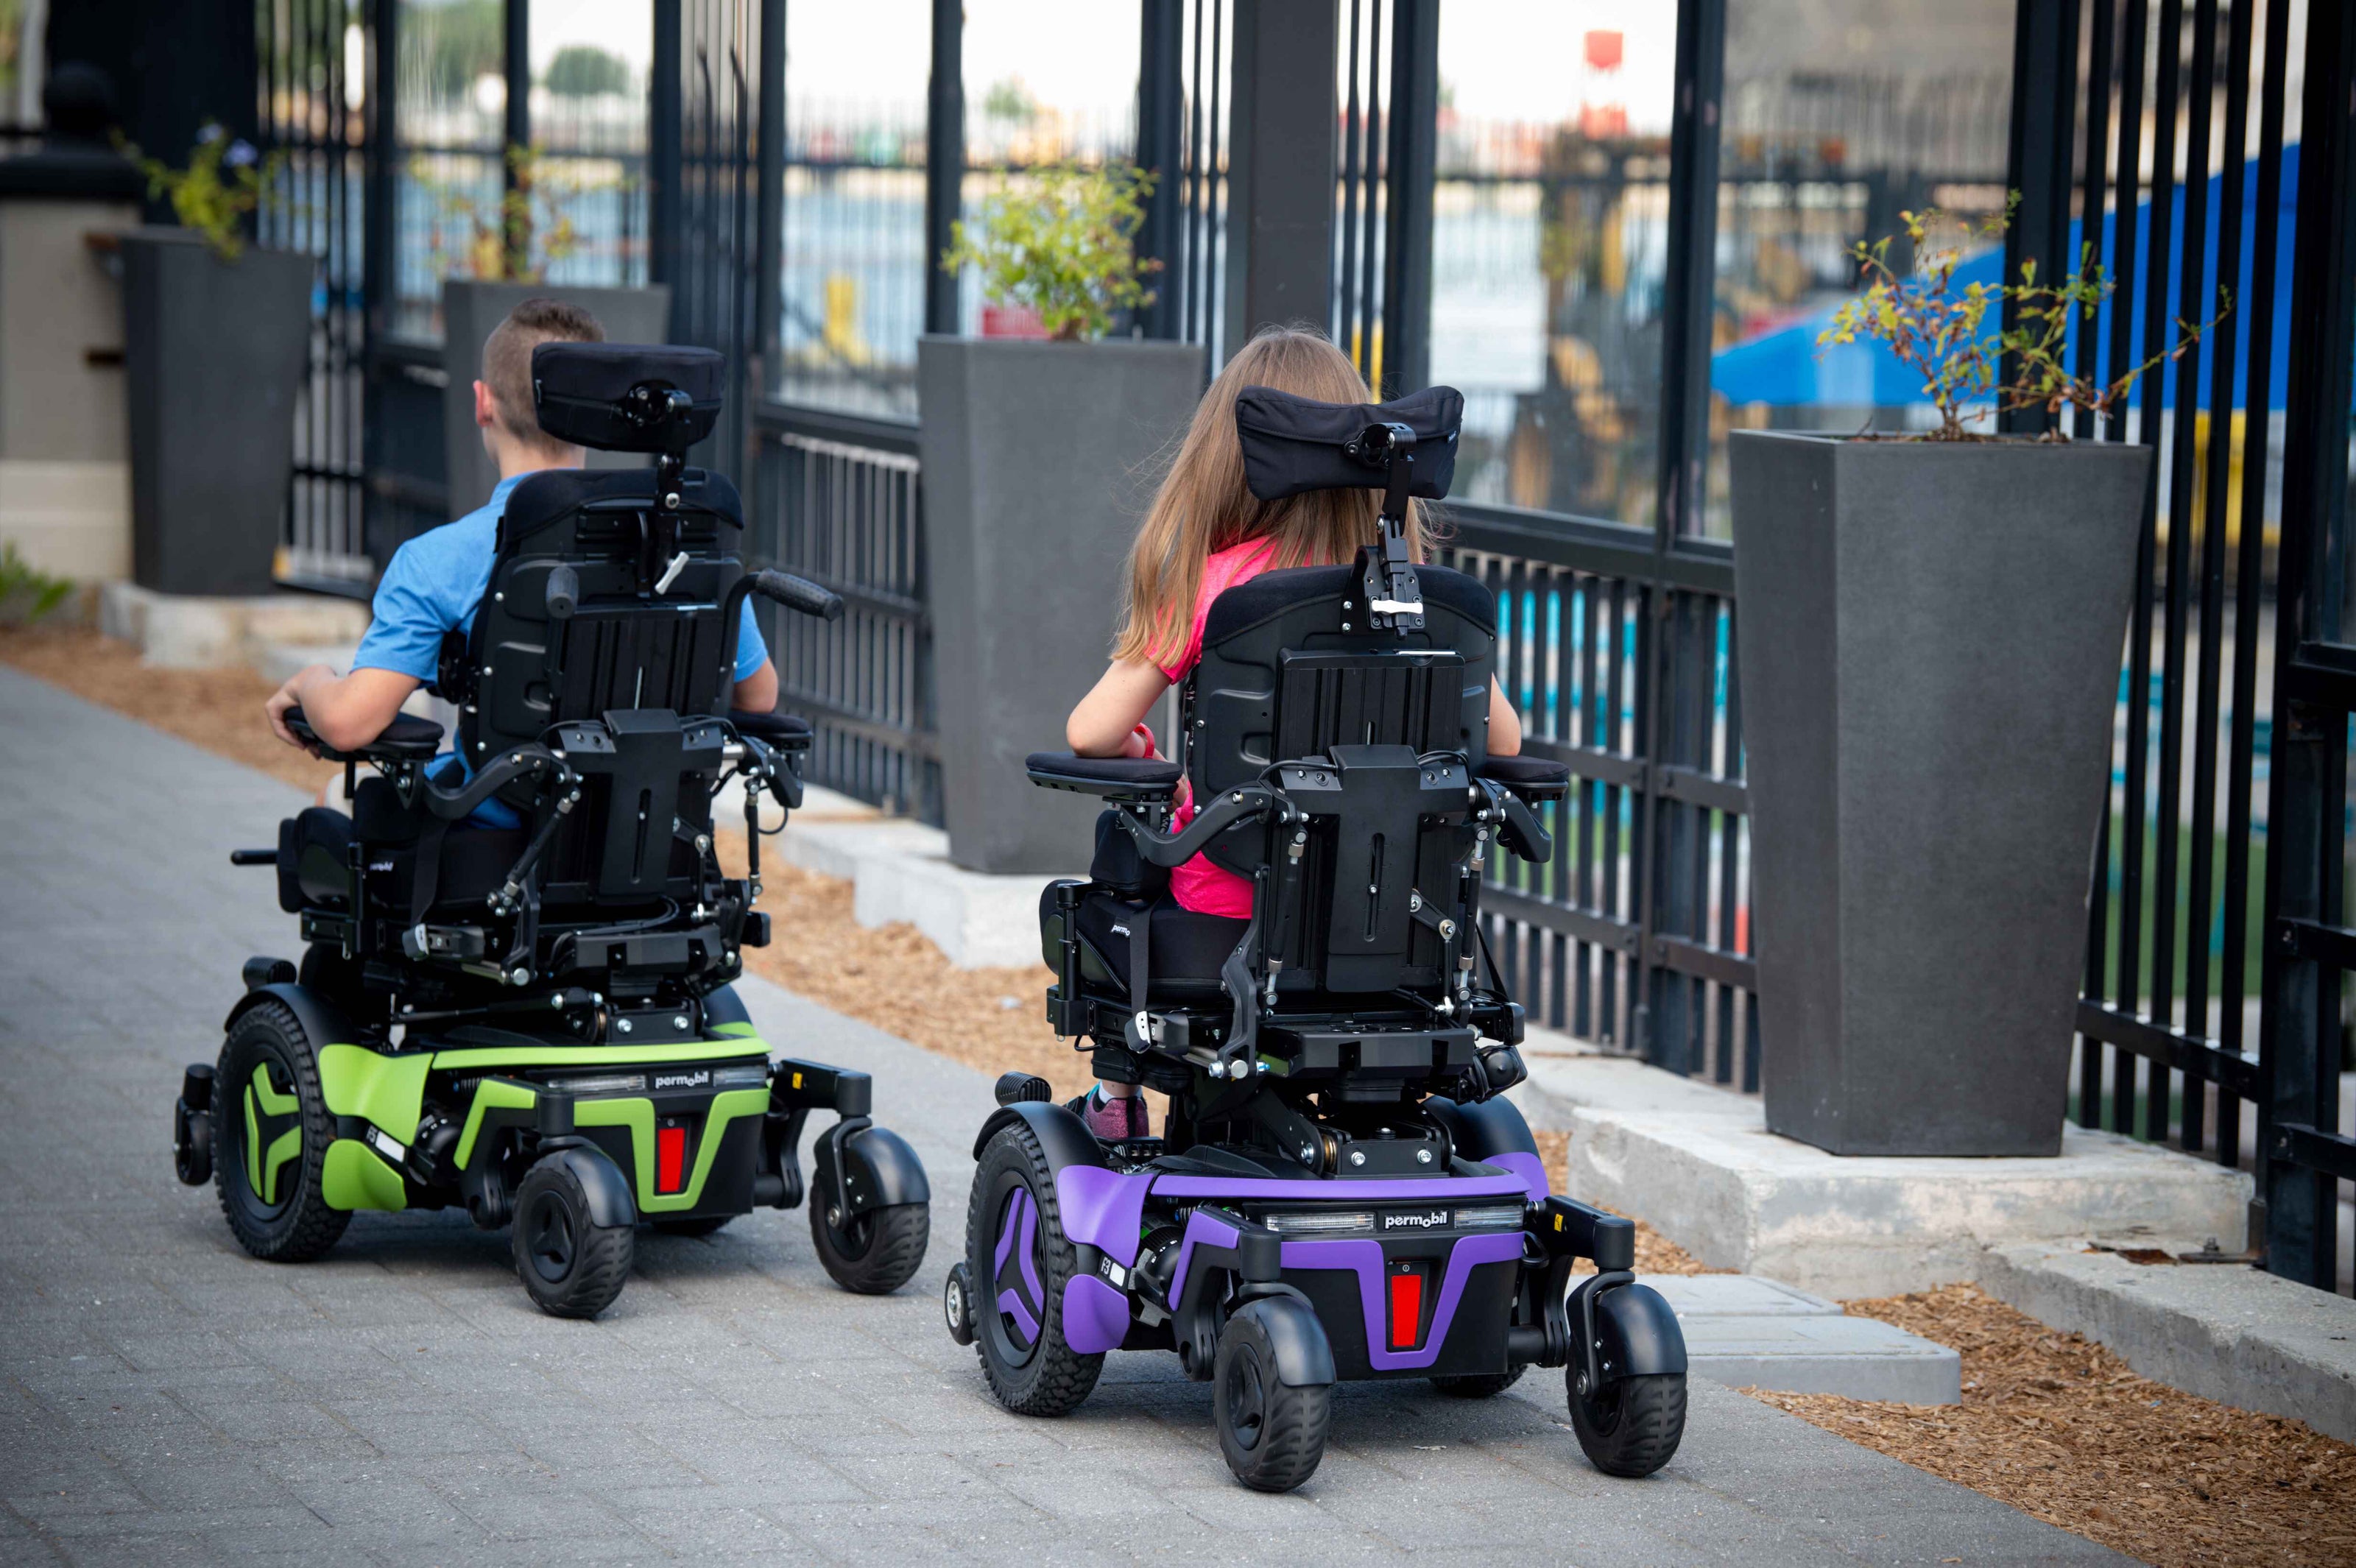 Two Permobil F3 Corpus powerchairs. One in Spring Green and one in Violet purple.